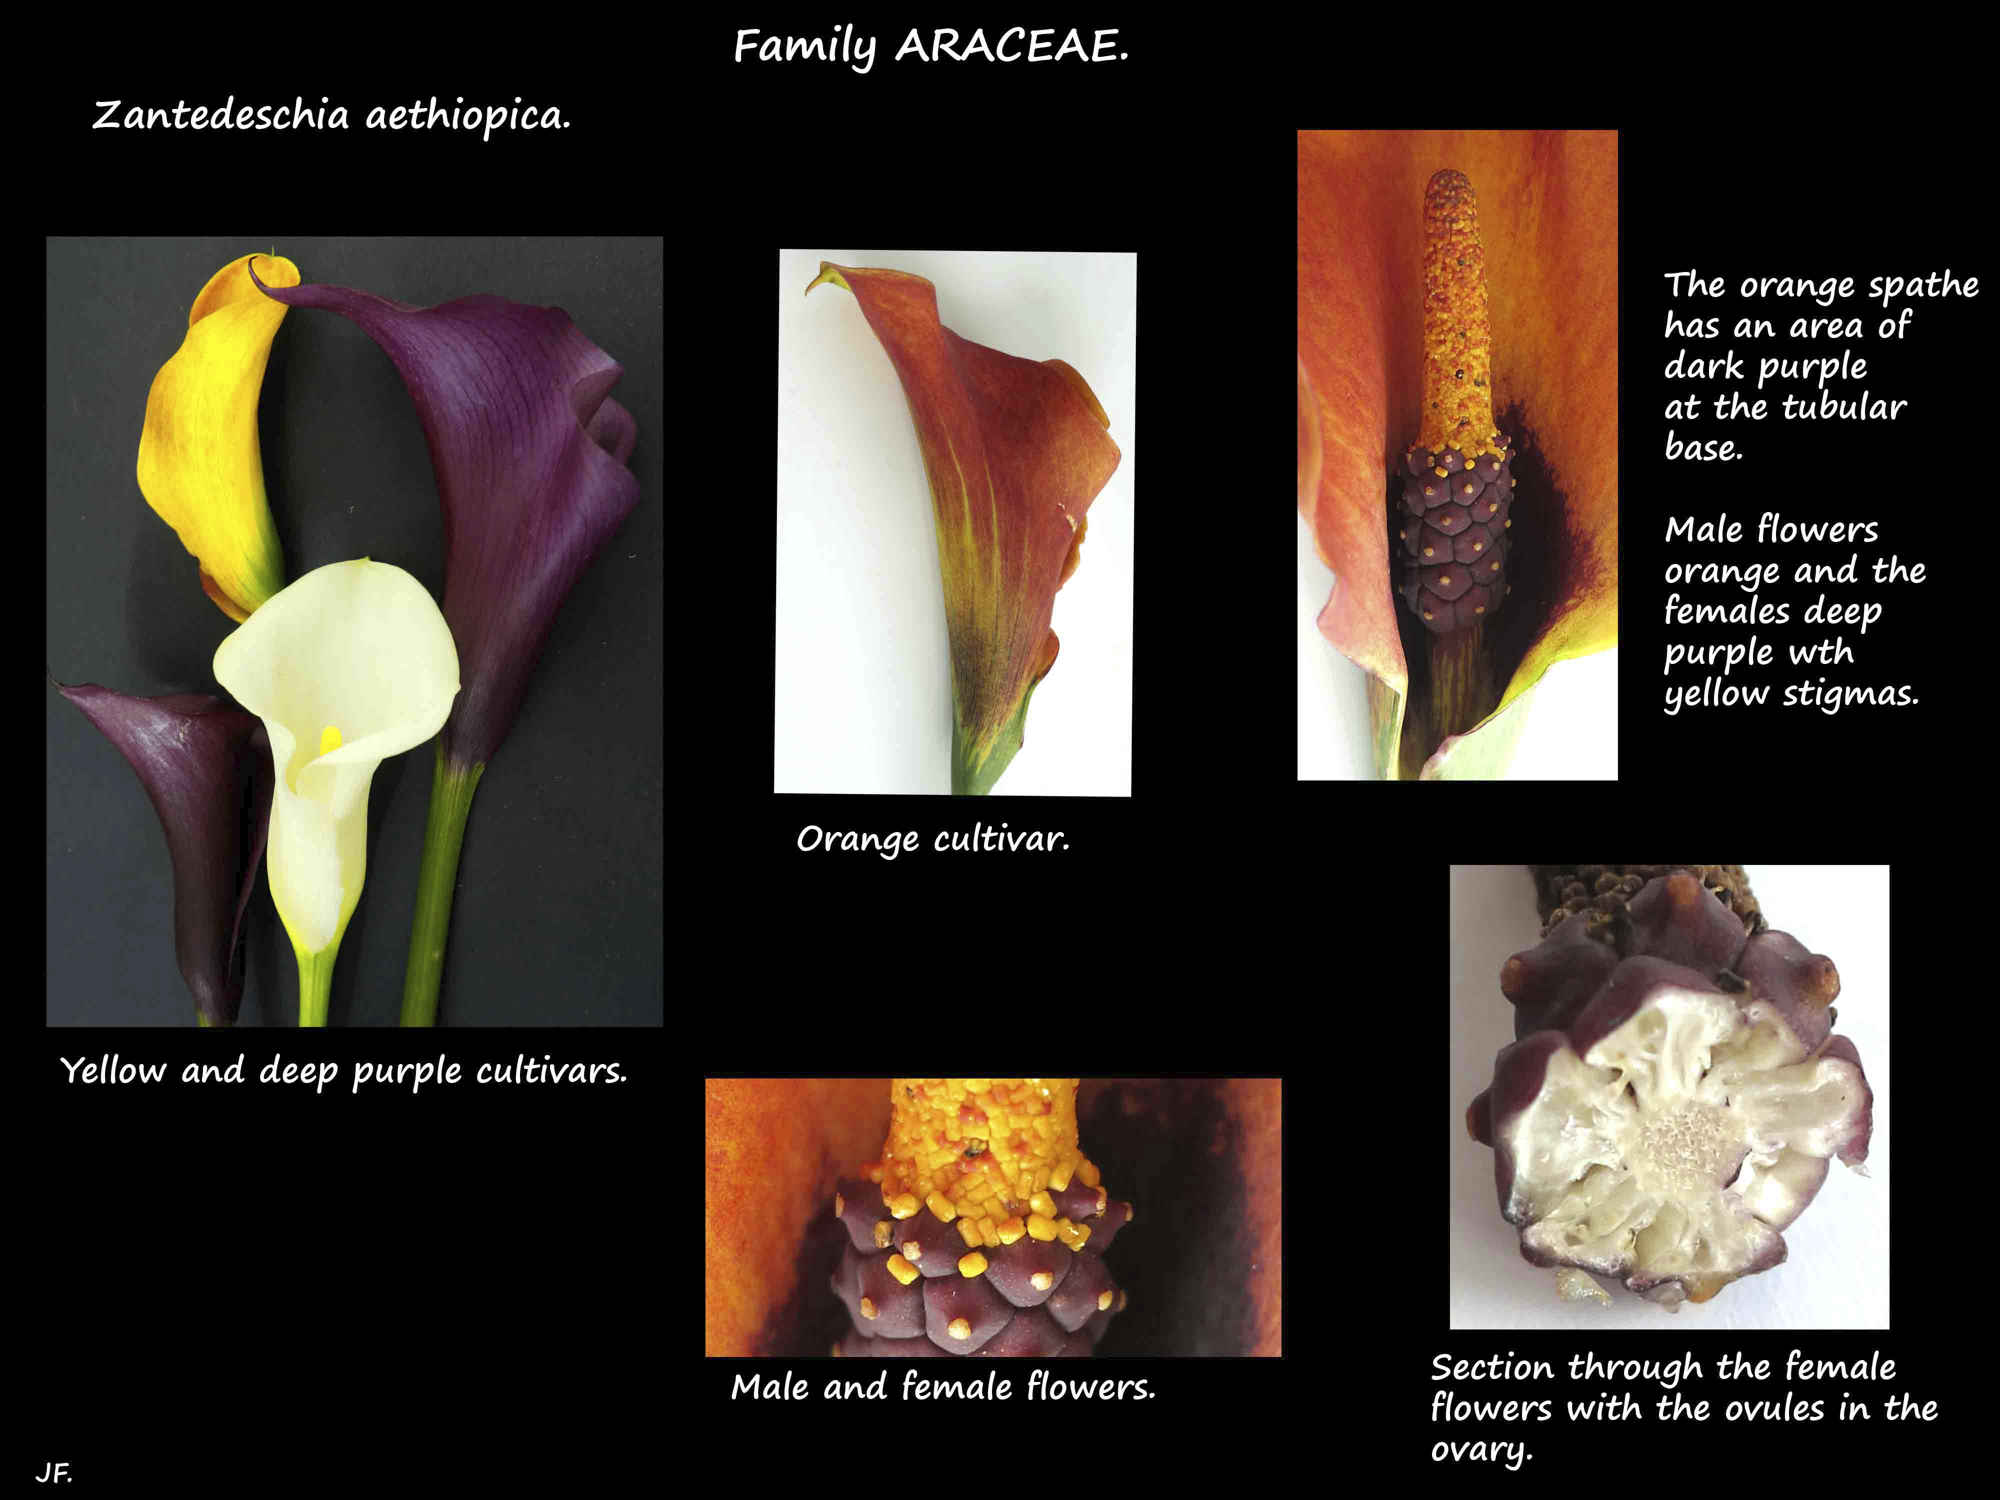 1 Flowers, spathe & spadix of Arum or Calla lilies